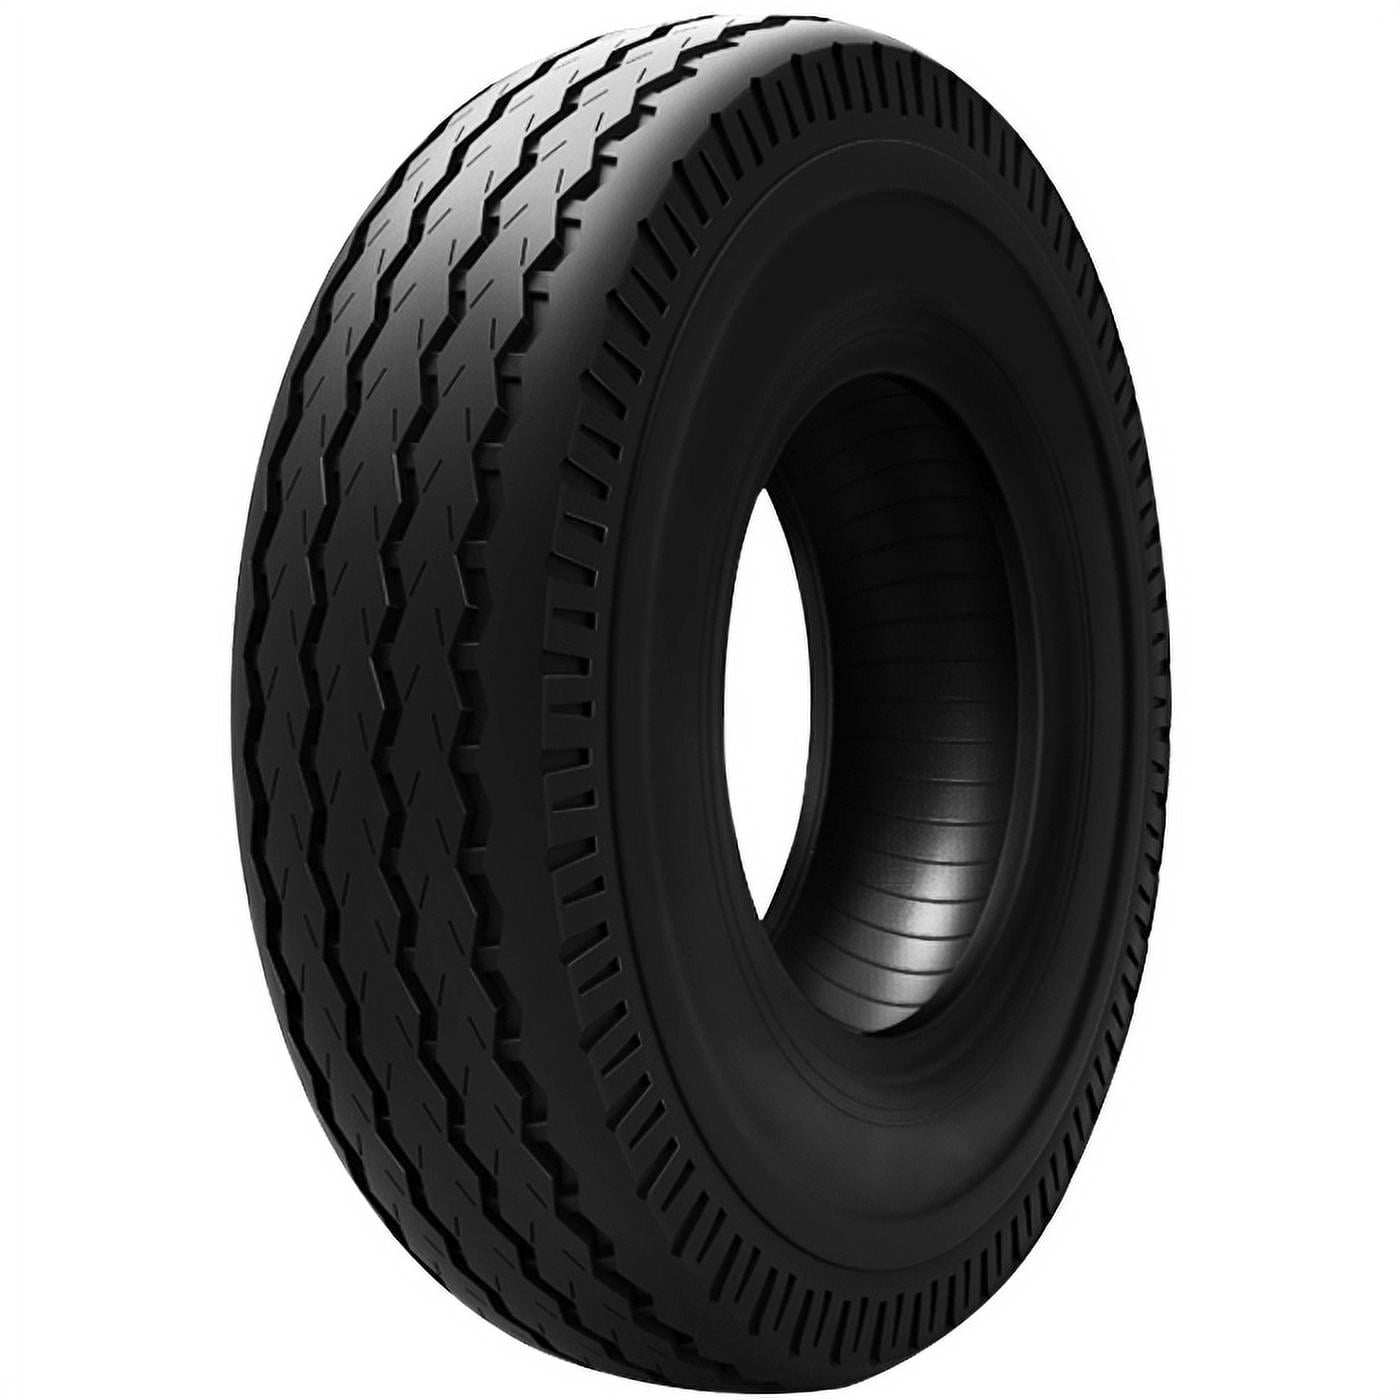 1 New 7-14.5 Firestone Tube Low Platform Trailer Mobile Home Tire FREE Shipping 